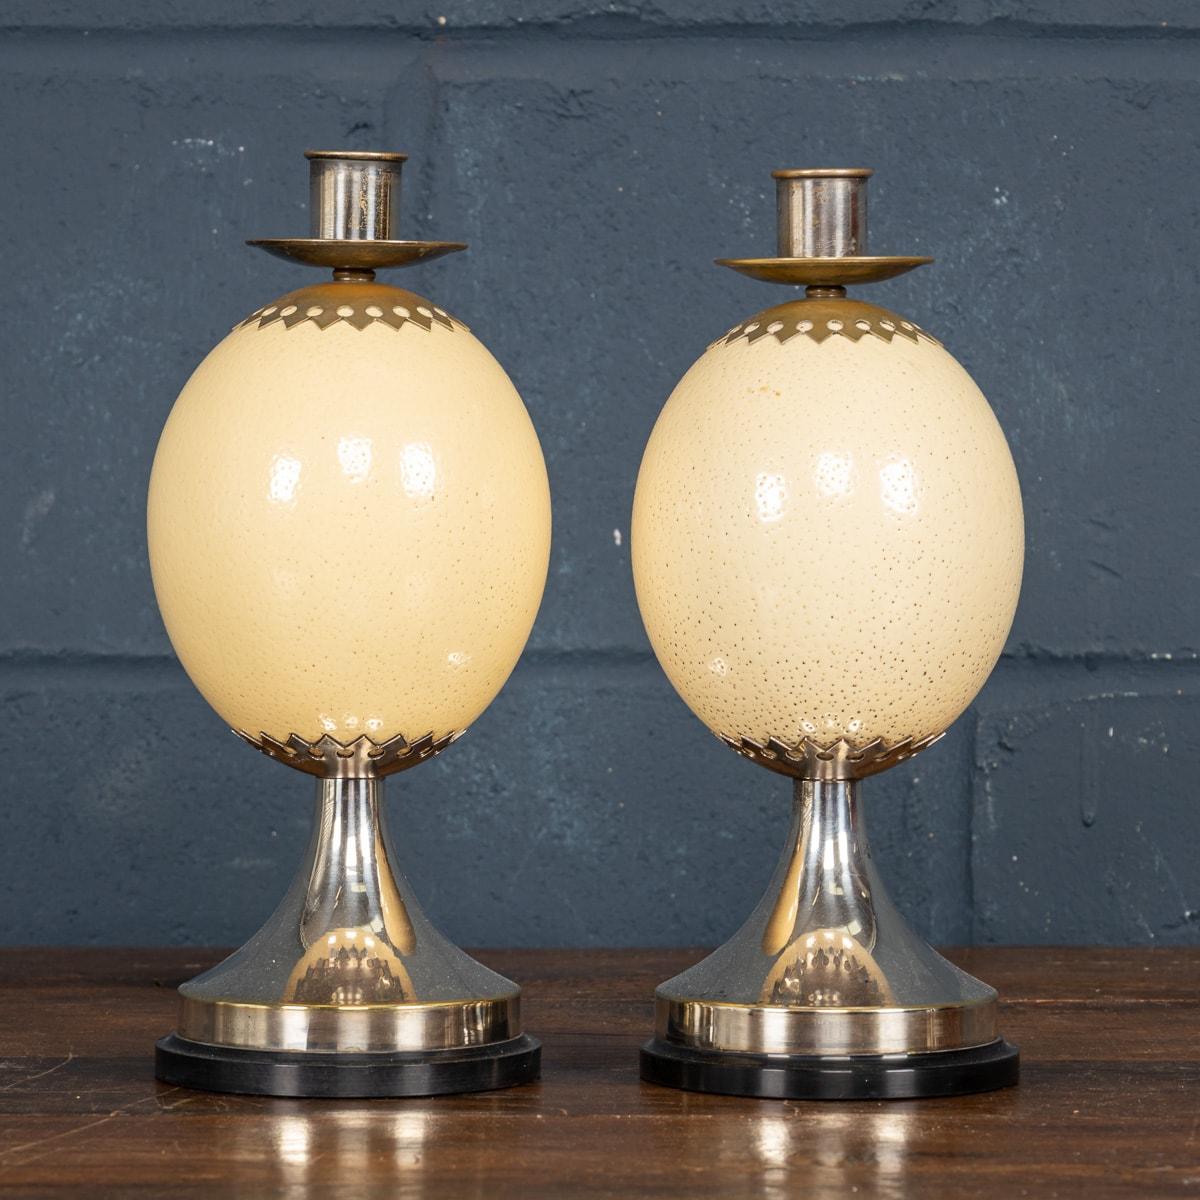 British Pair Of Ostrich Egg Mounted Silver Plate Candlesticks By Anthony Redmile, c.1970 For Sale